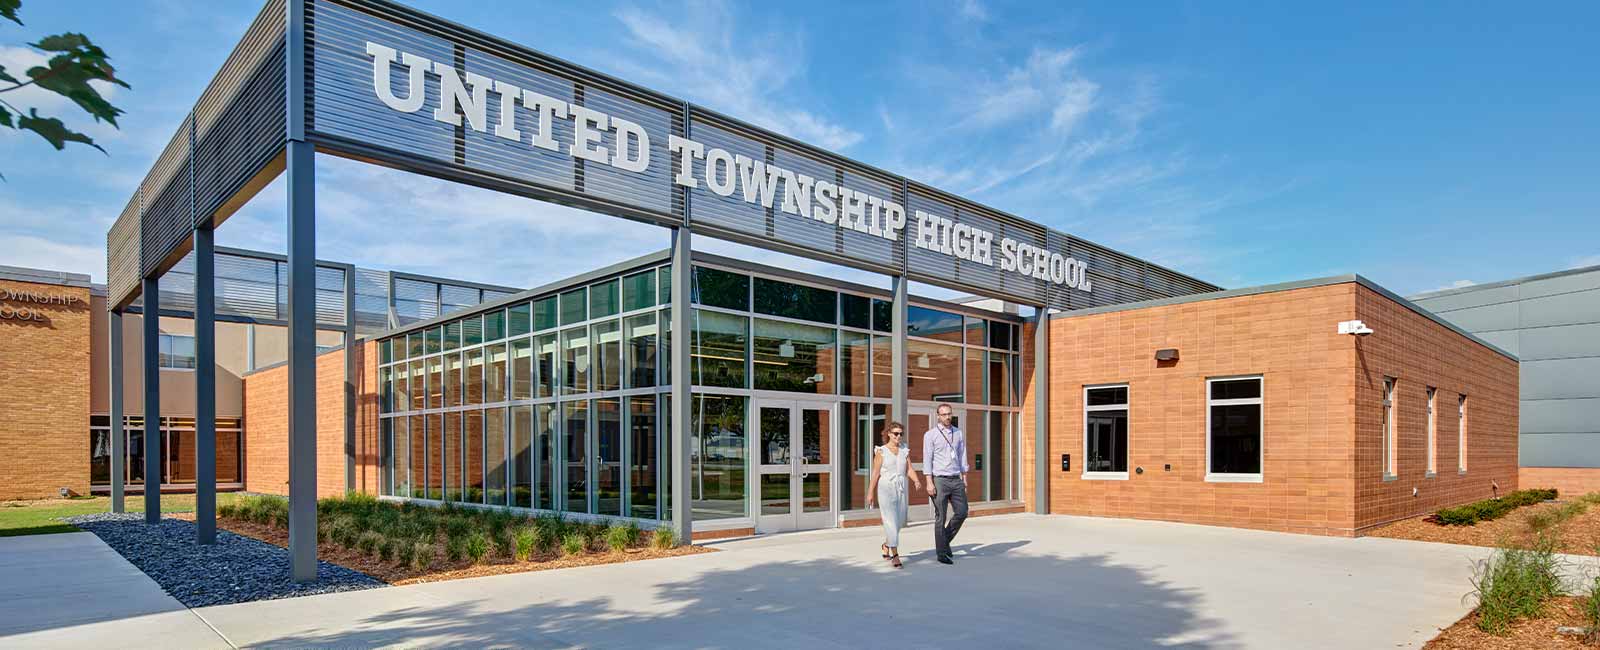 United Township High School – Student Life Center